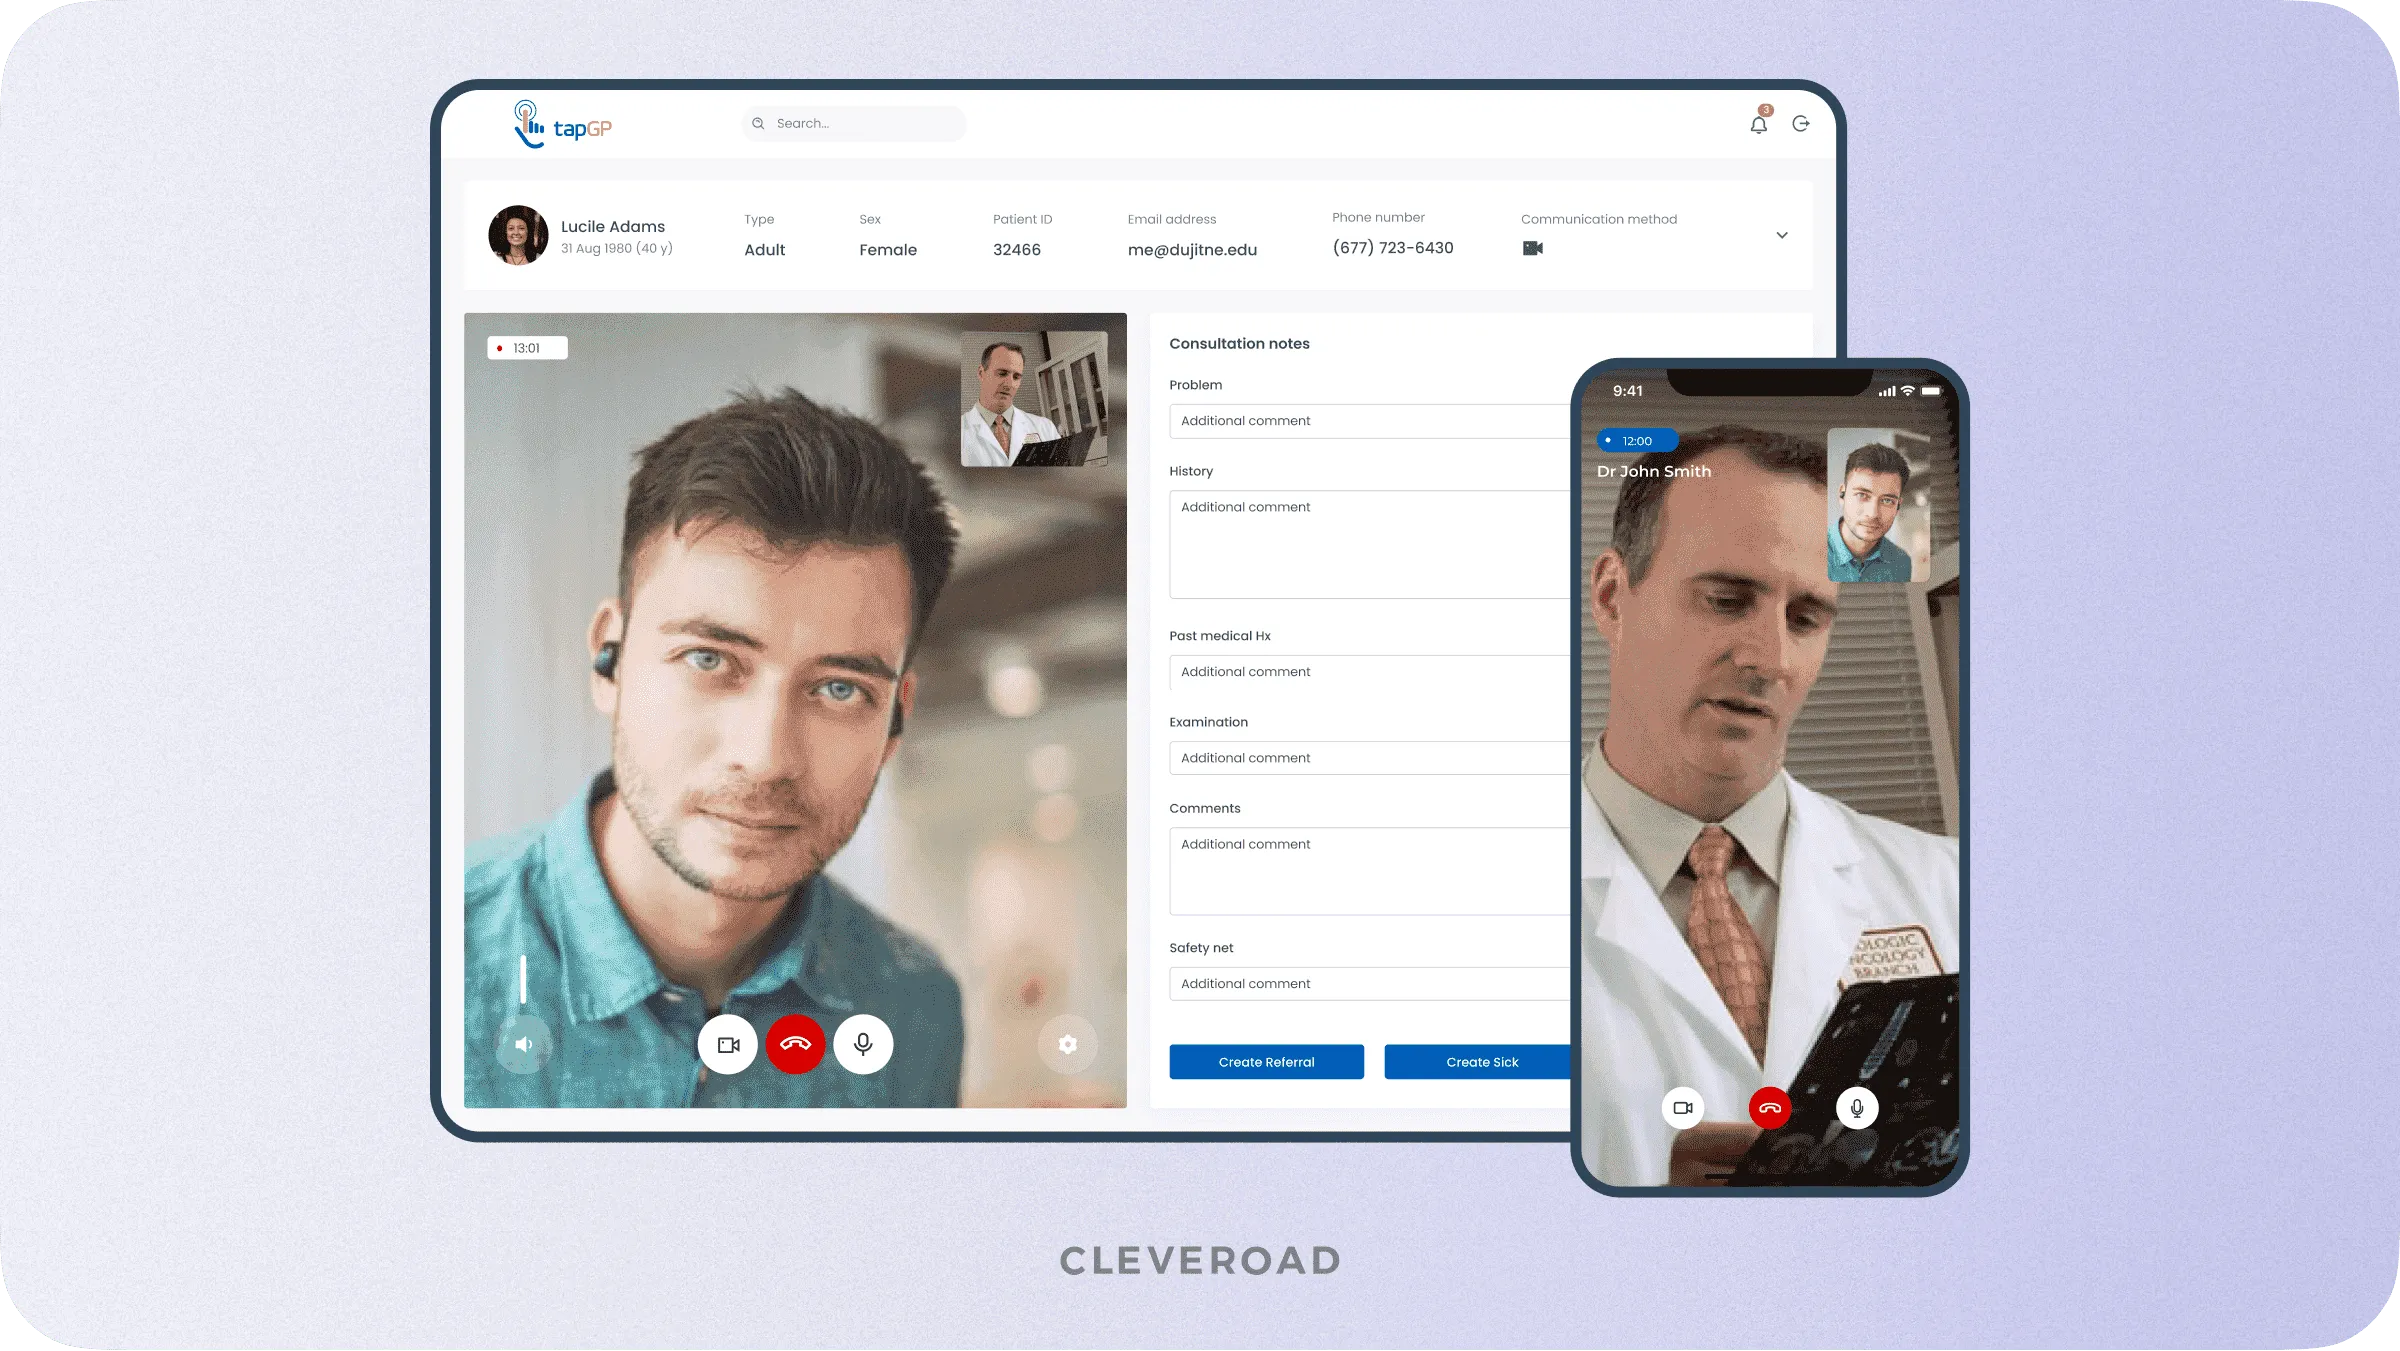 Video consultations developed by Cleveroad